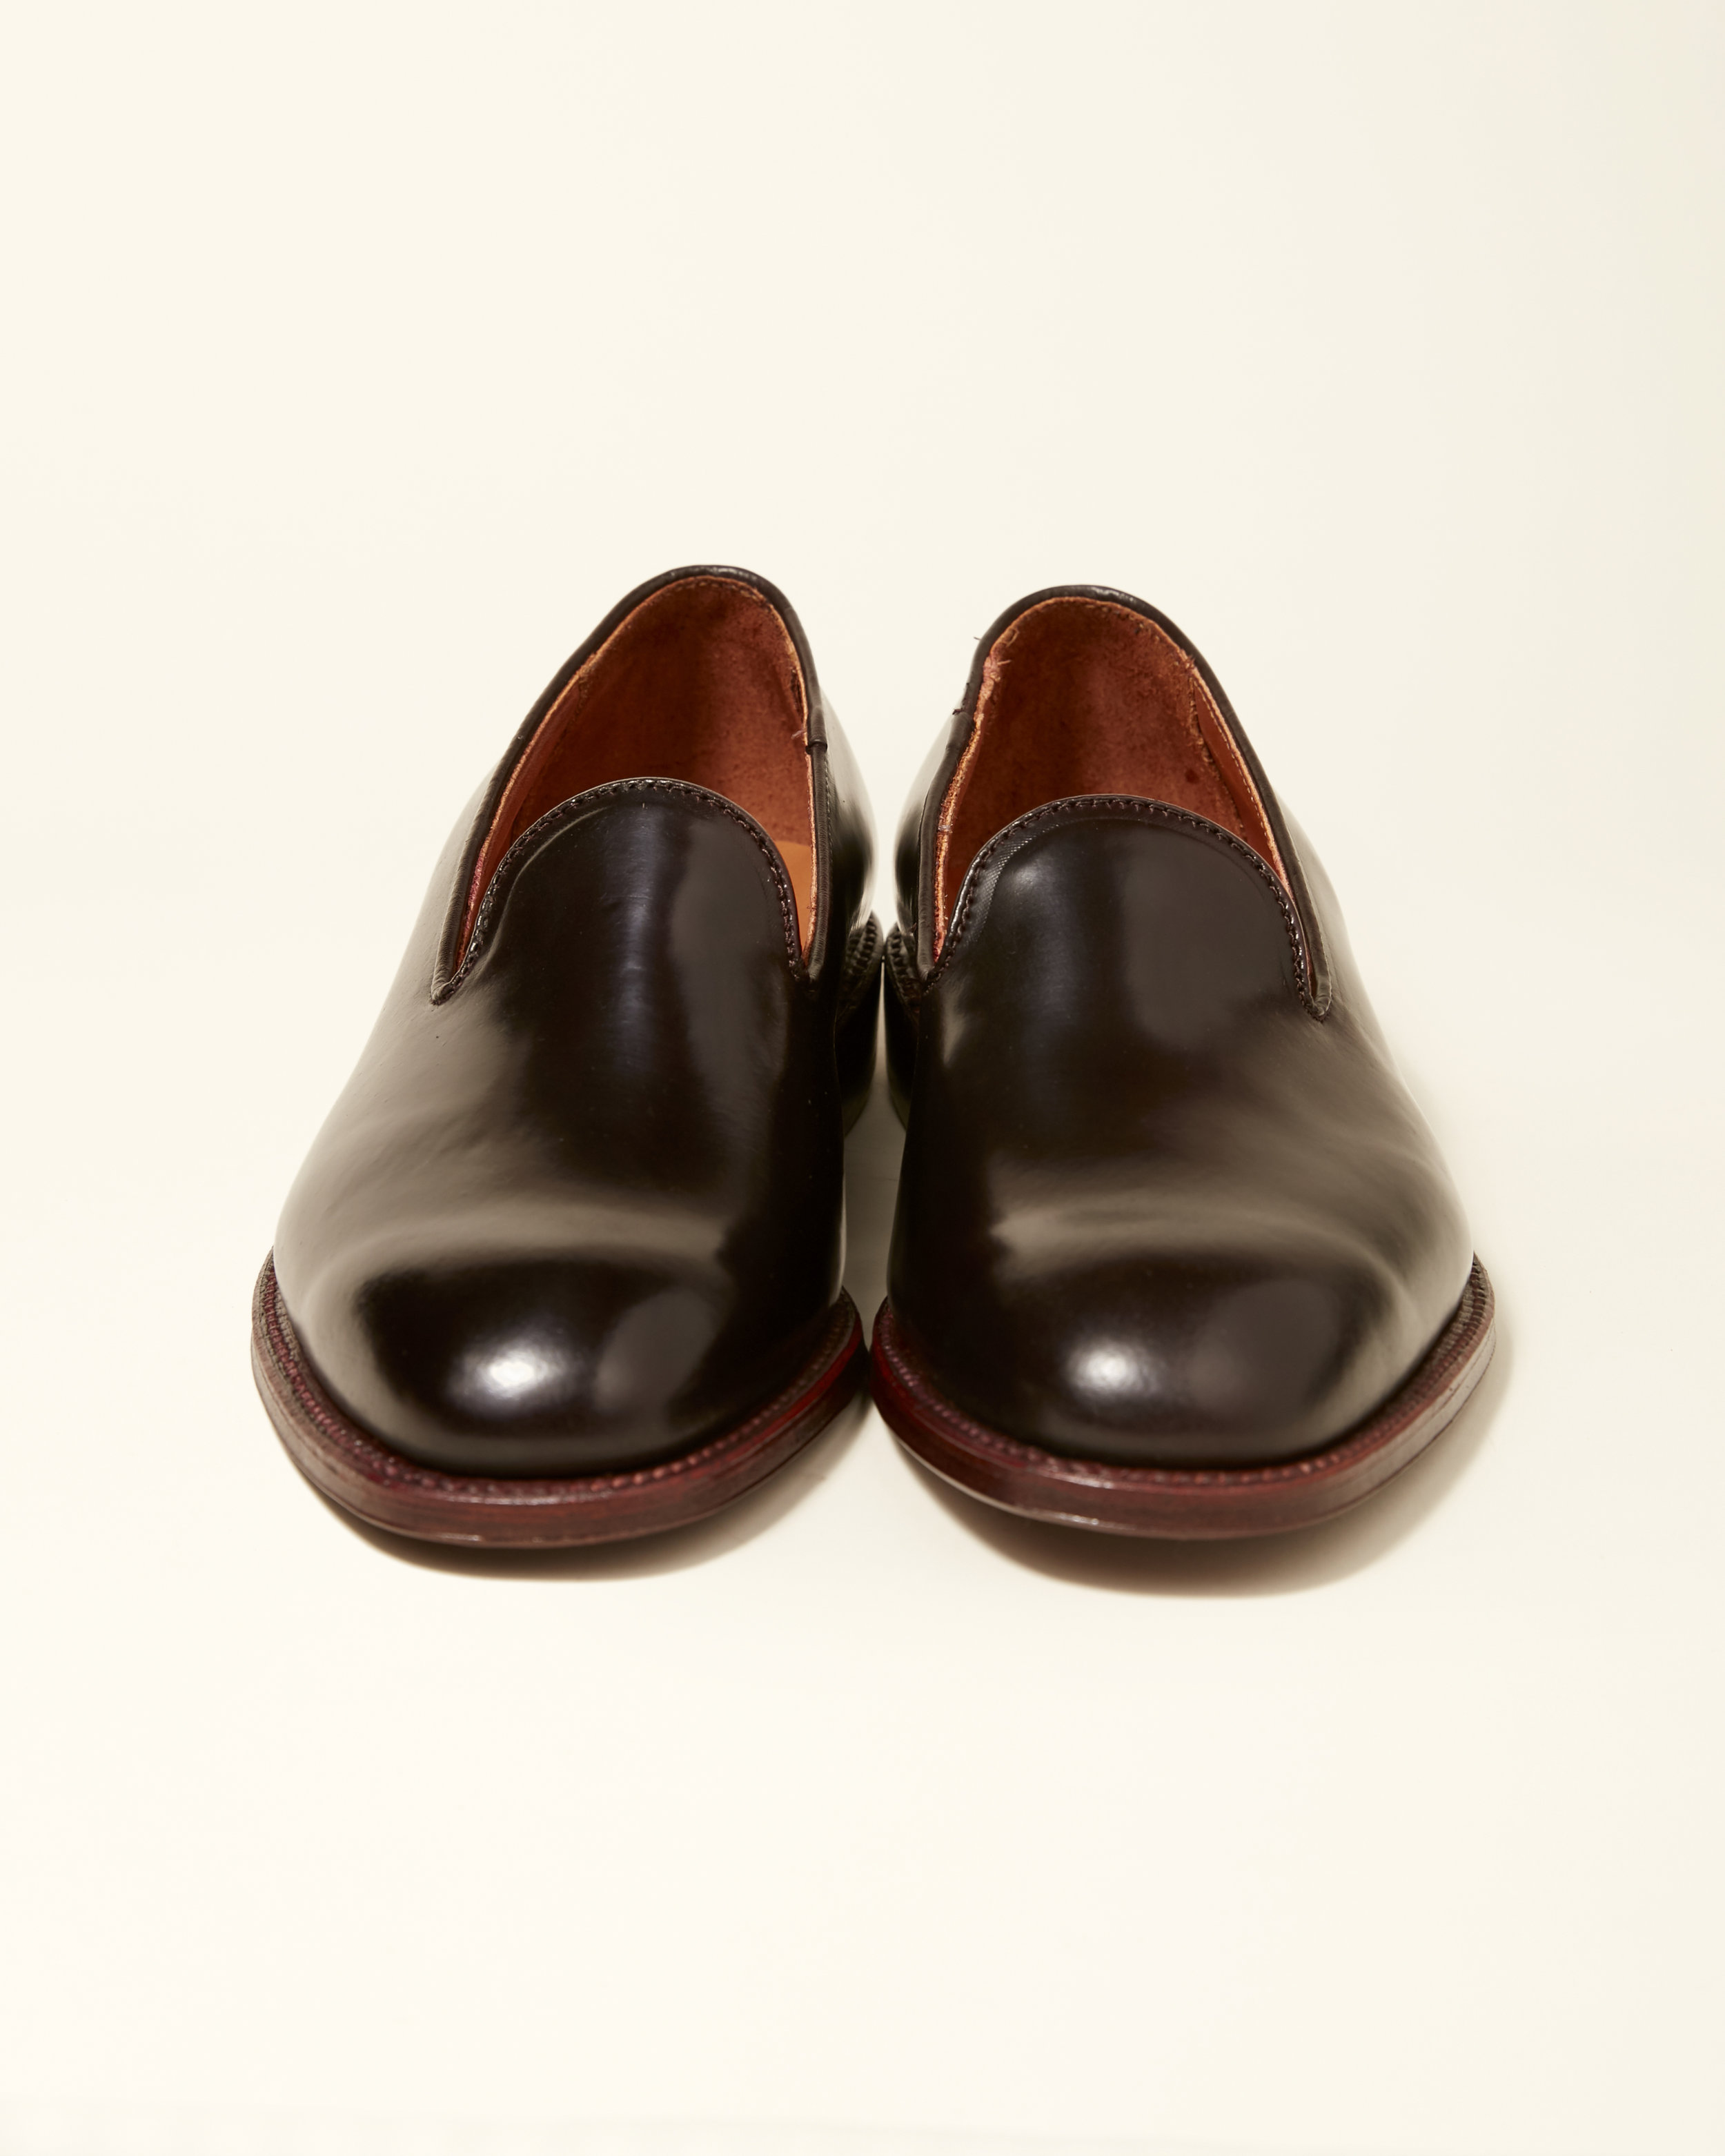 The 'Cassill Loafer' Color 8 Shell Cordovan Plain Toe Slip On 